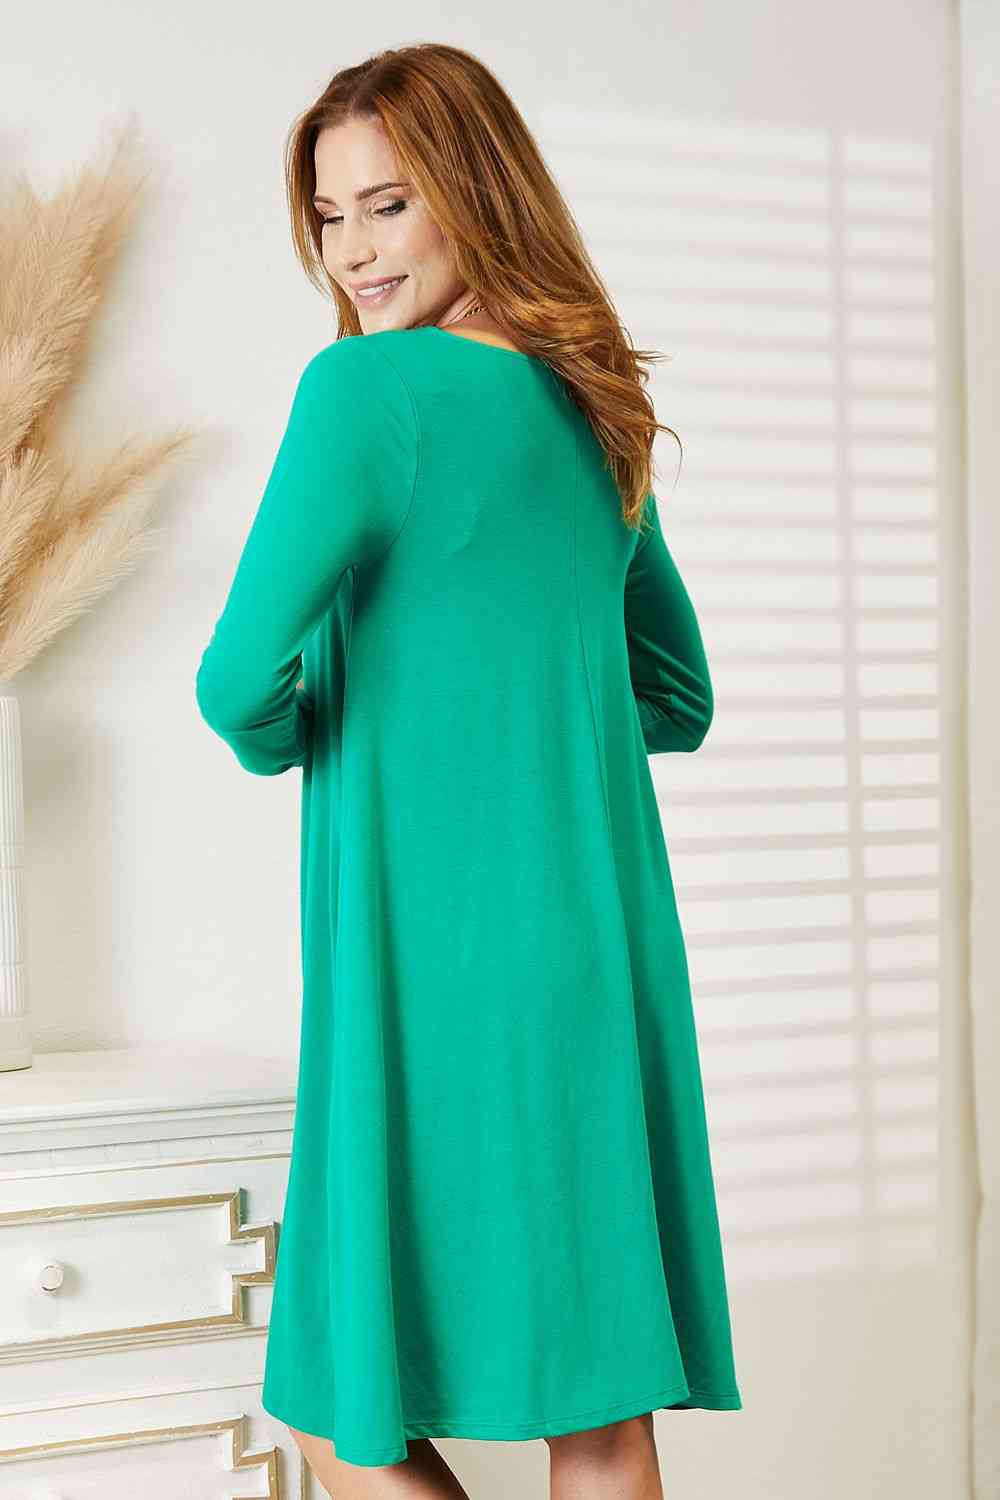 Long Sleeve Flare Dress with Pockets - All Dresses - Dresses - 8 - 2024